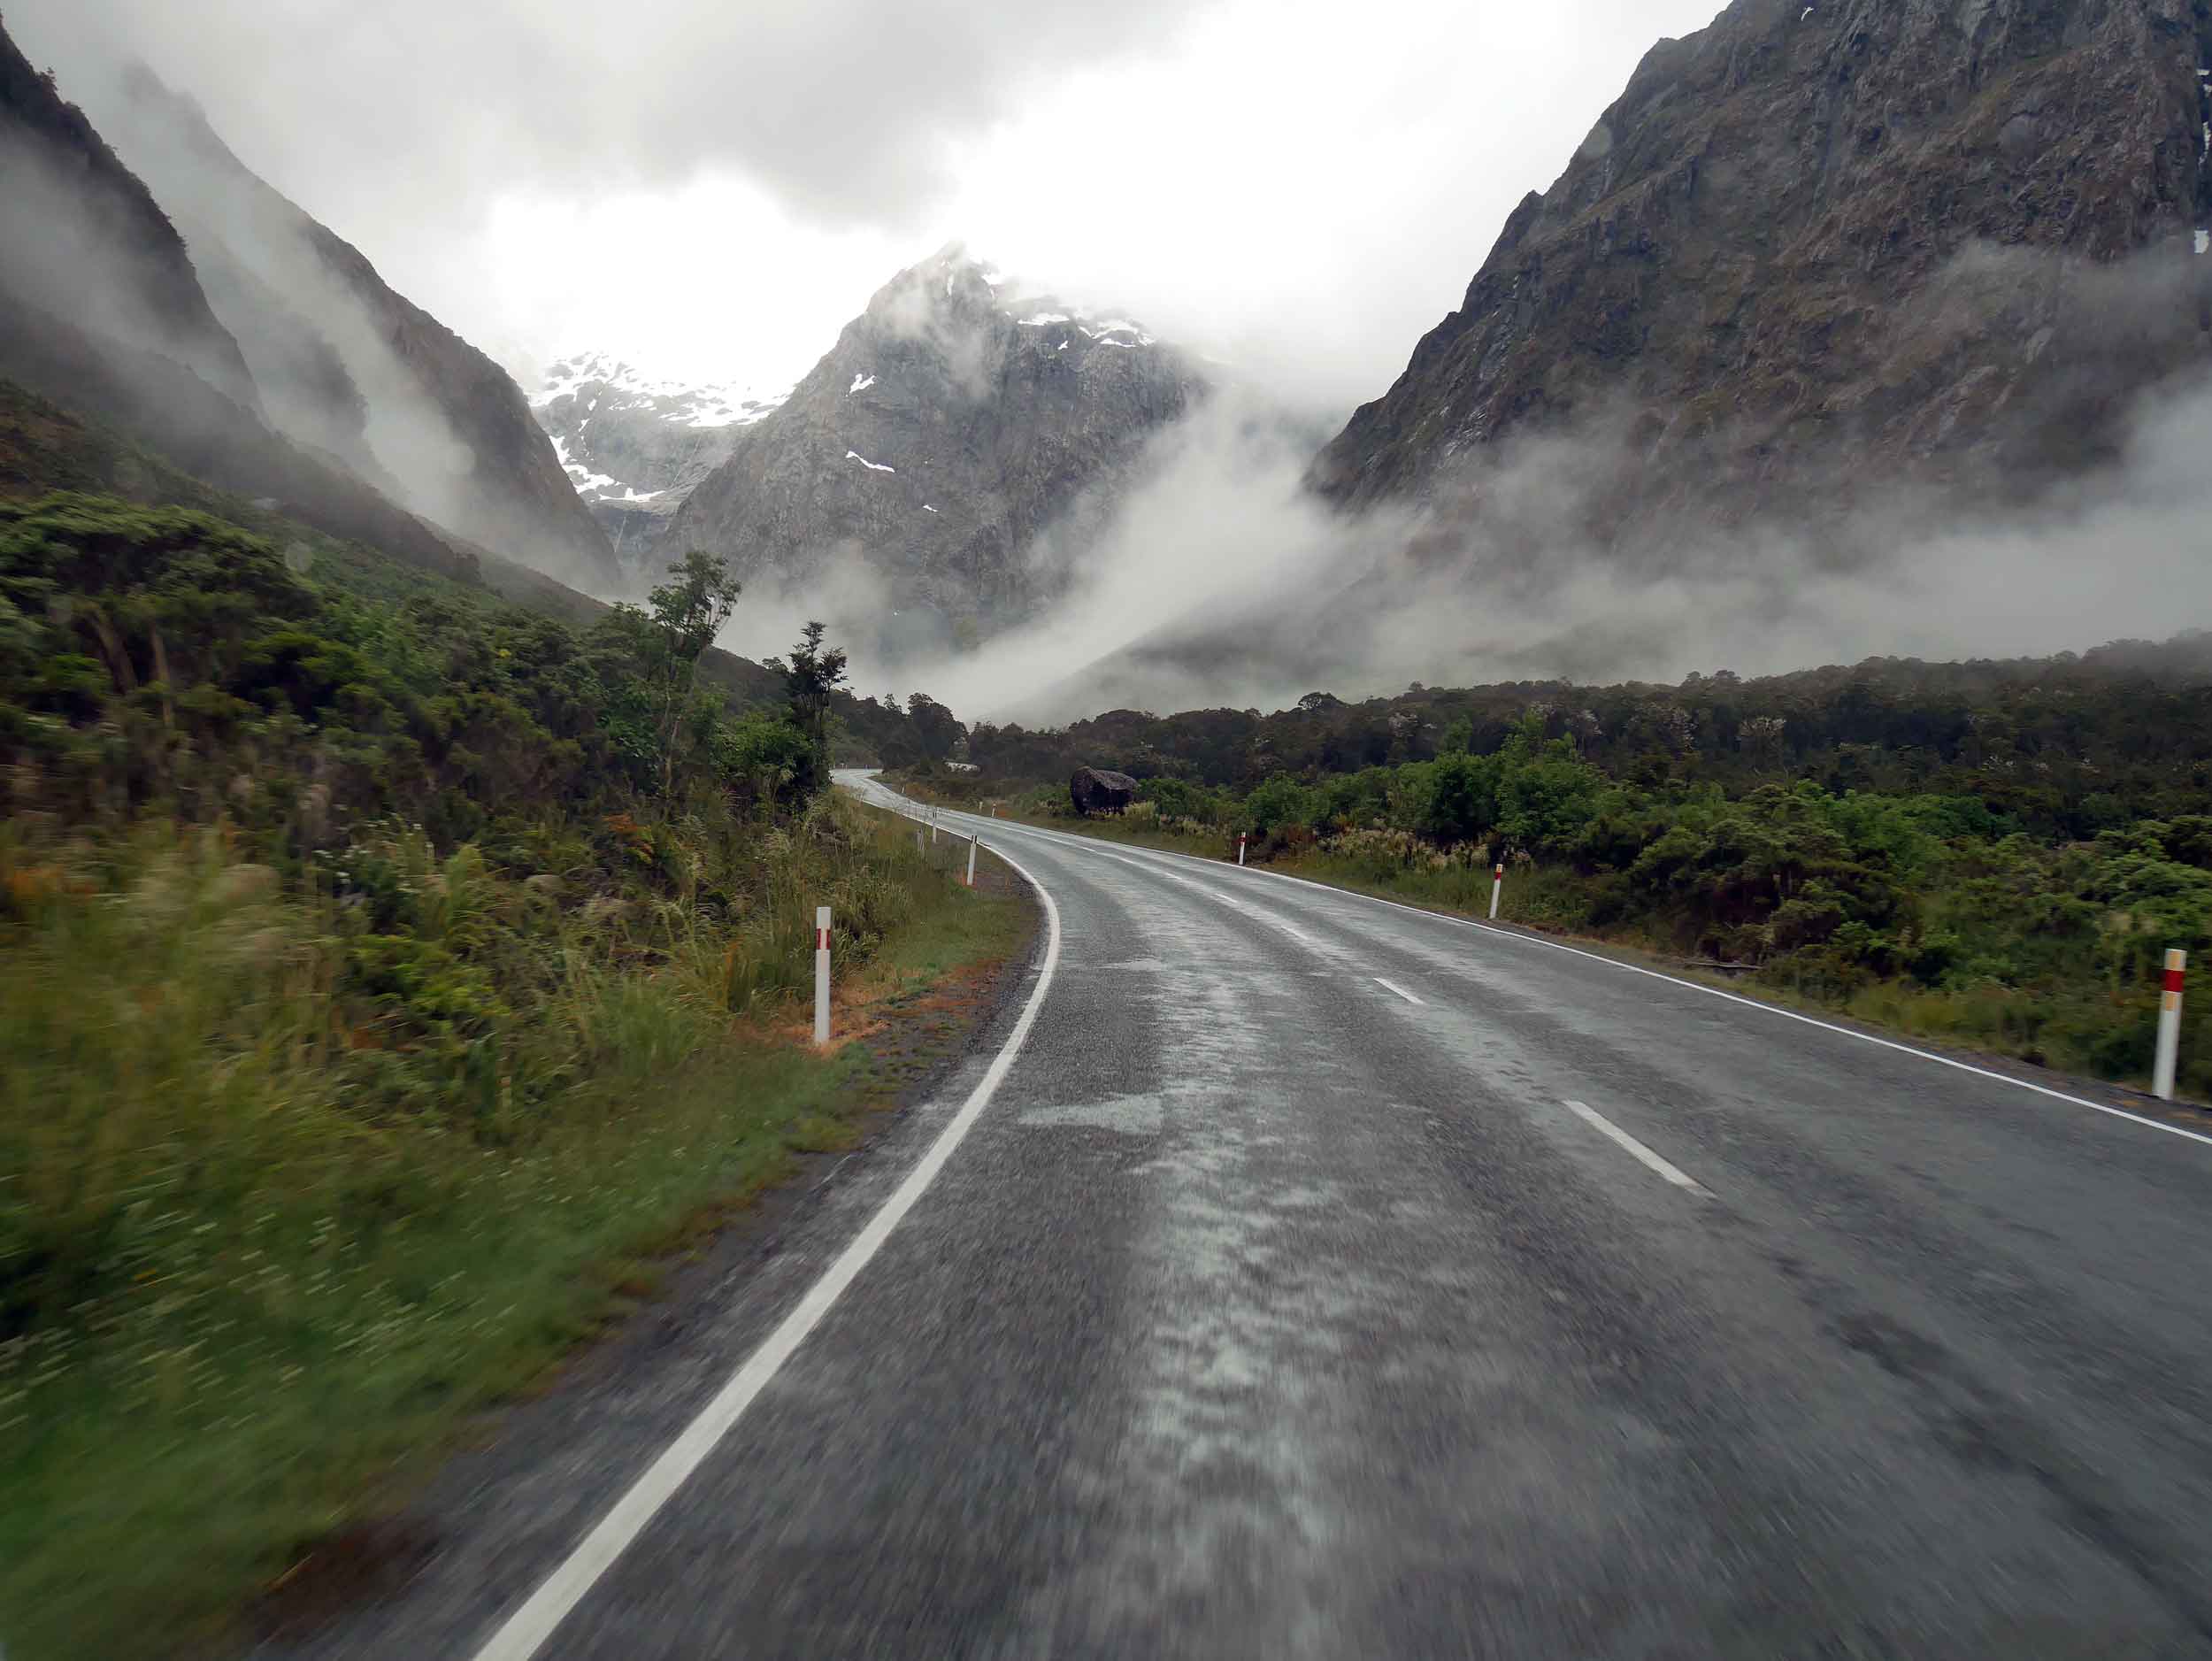  The moody Milford Road was wet and misty on our final stretch into Milford Sound (Jan 9).&nbsp; 